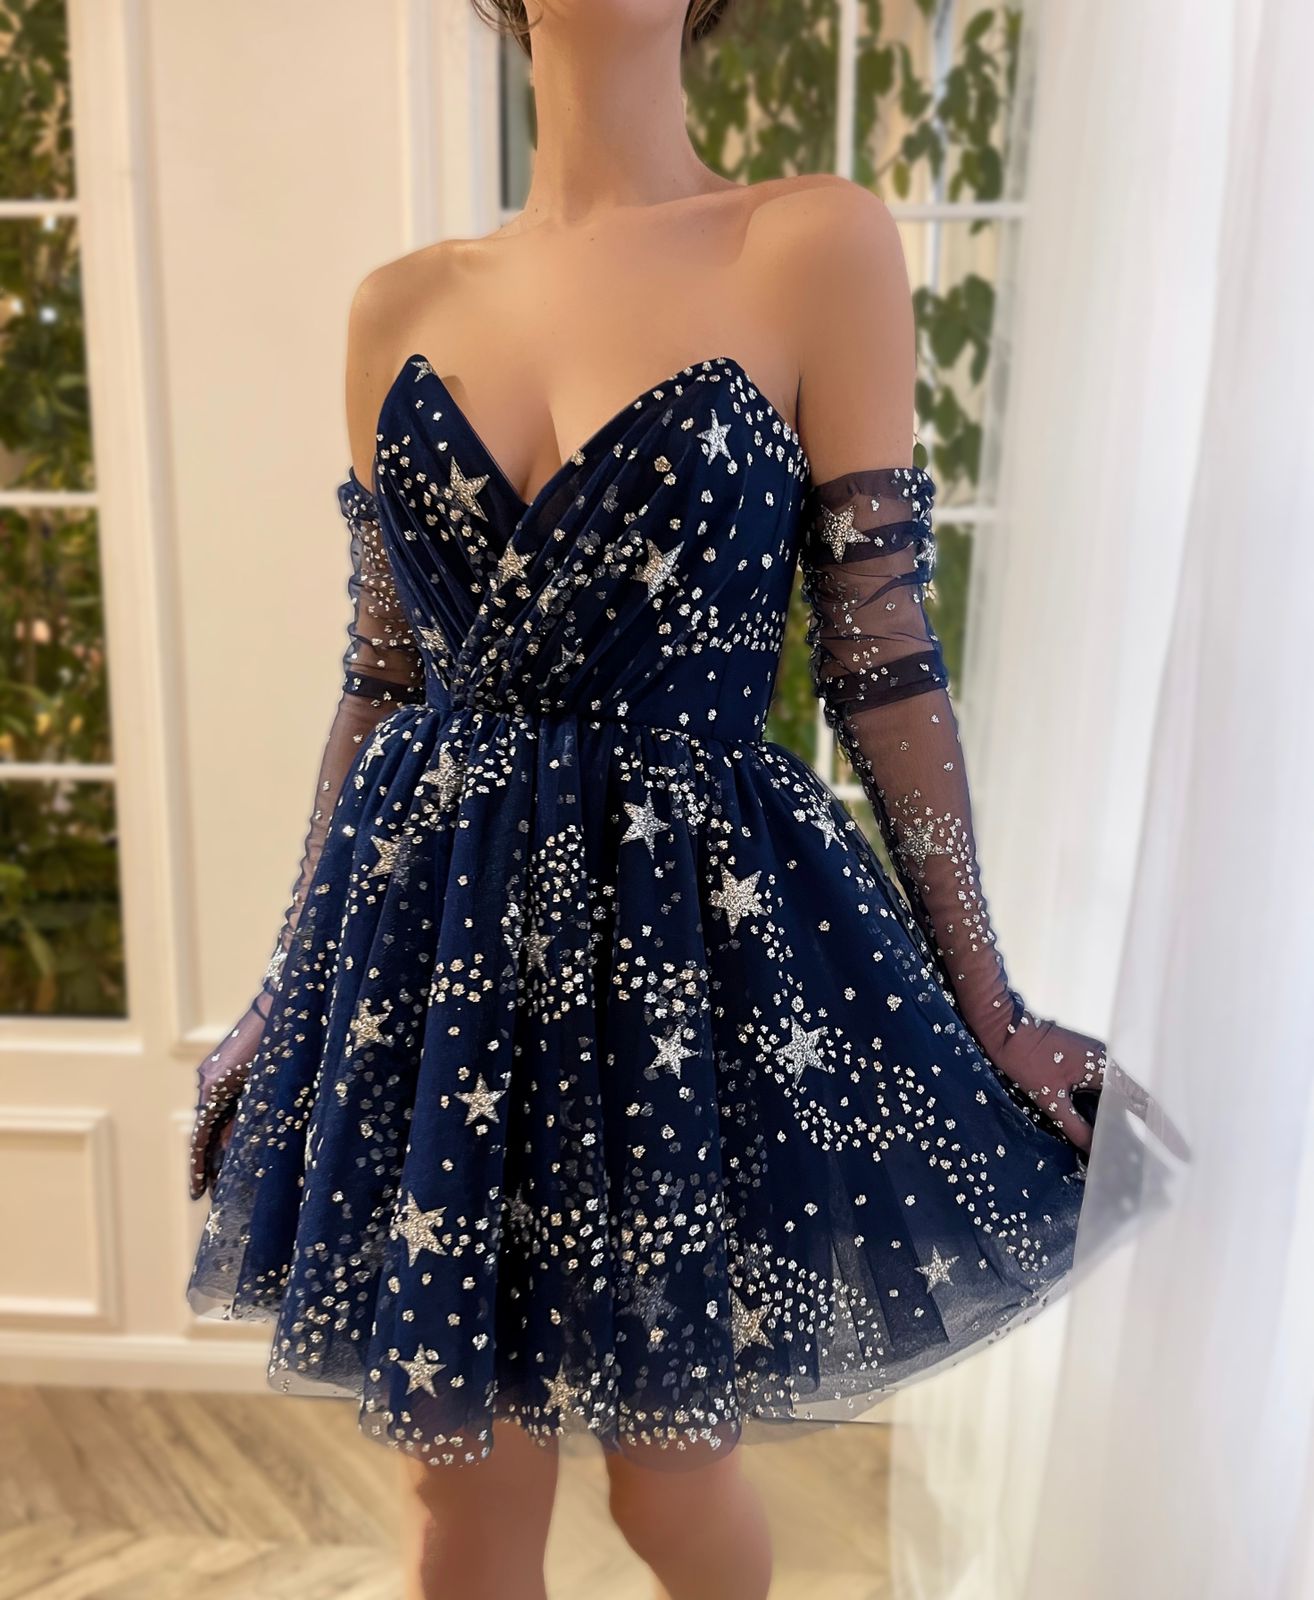 Blue mini dress with no sleeves, gloves and starry fabric